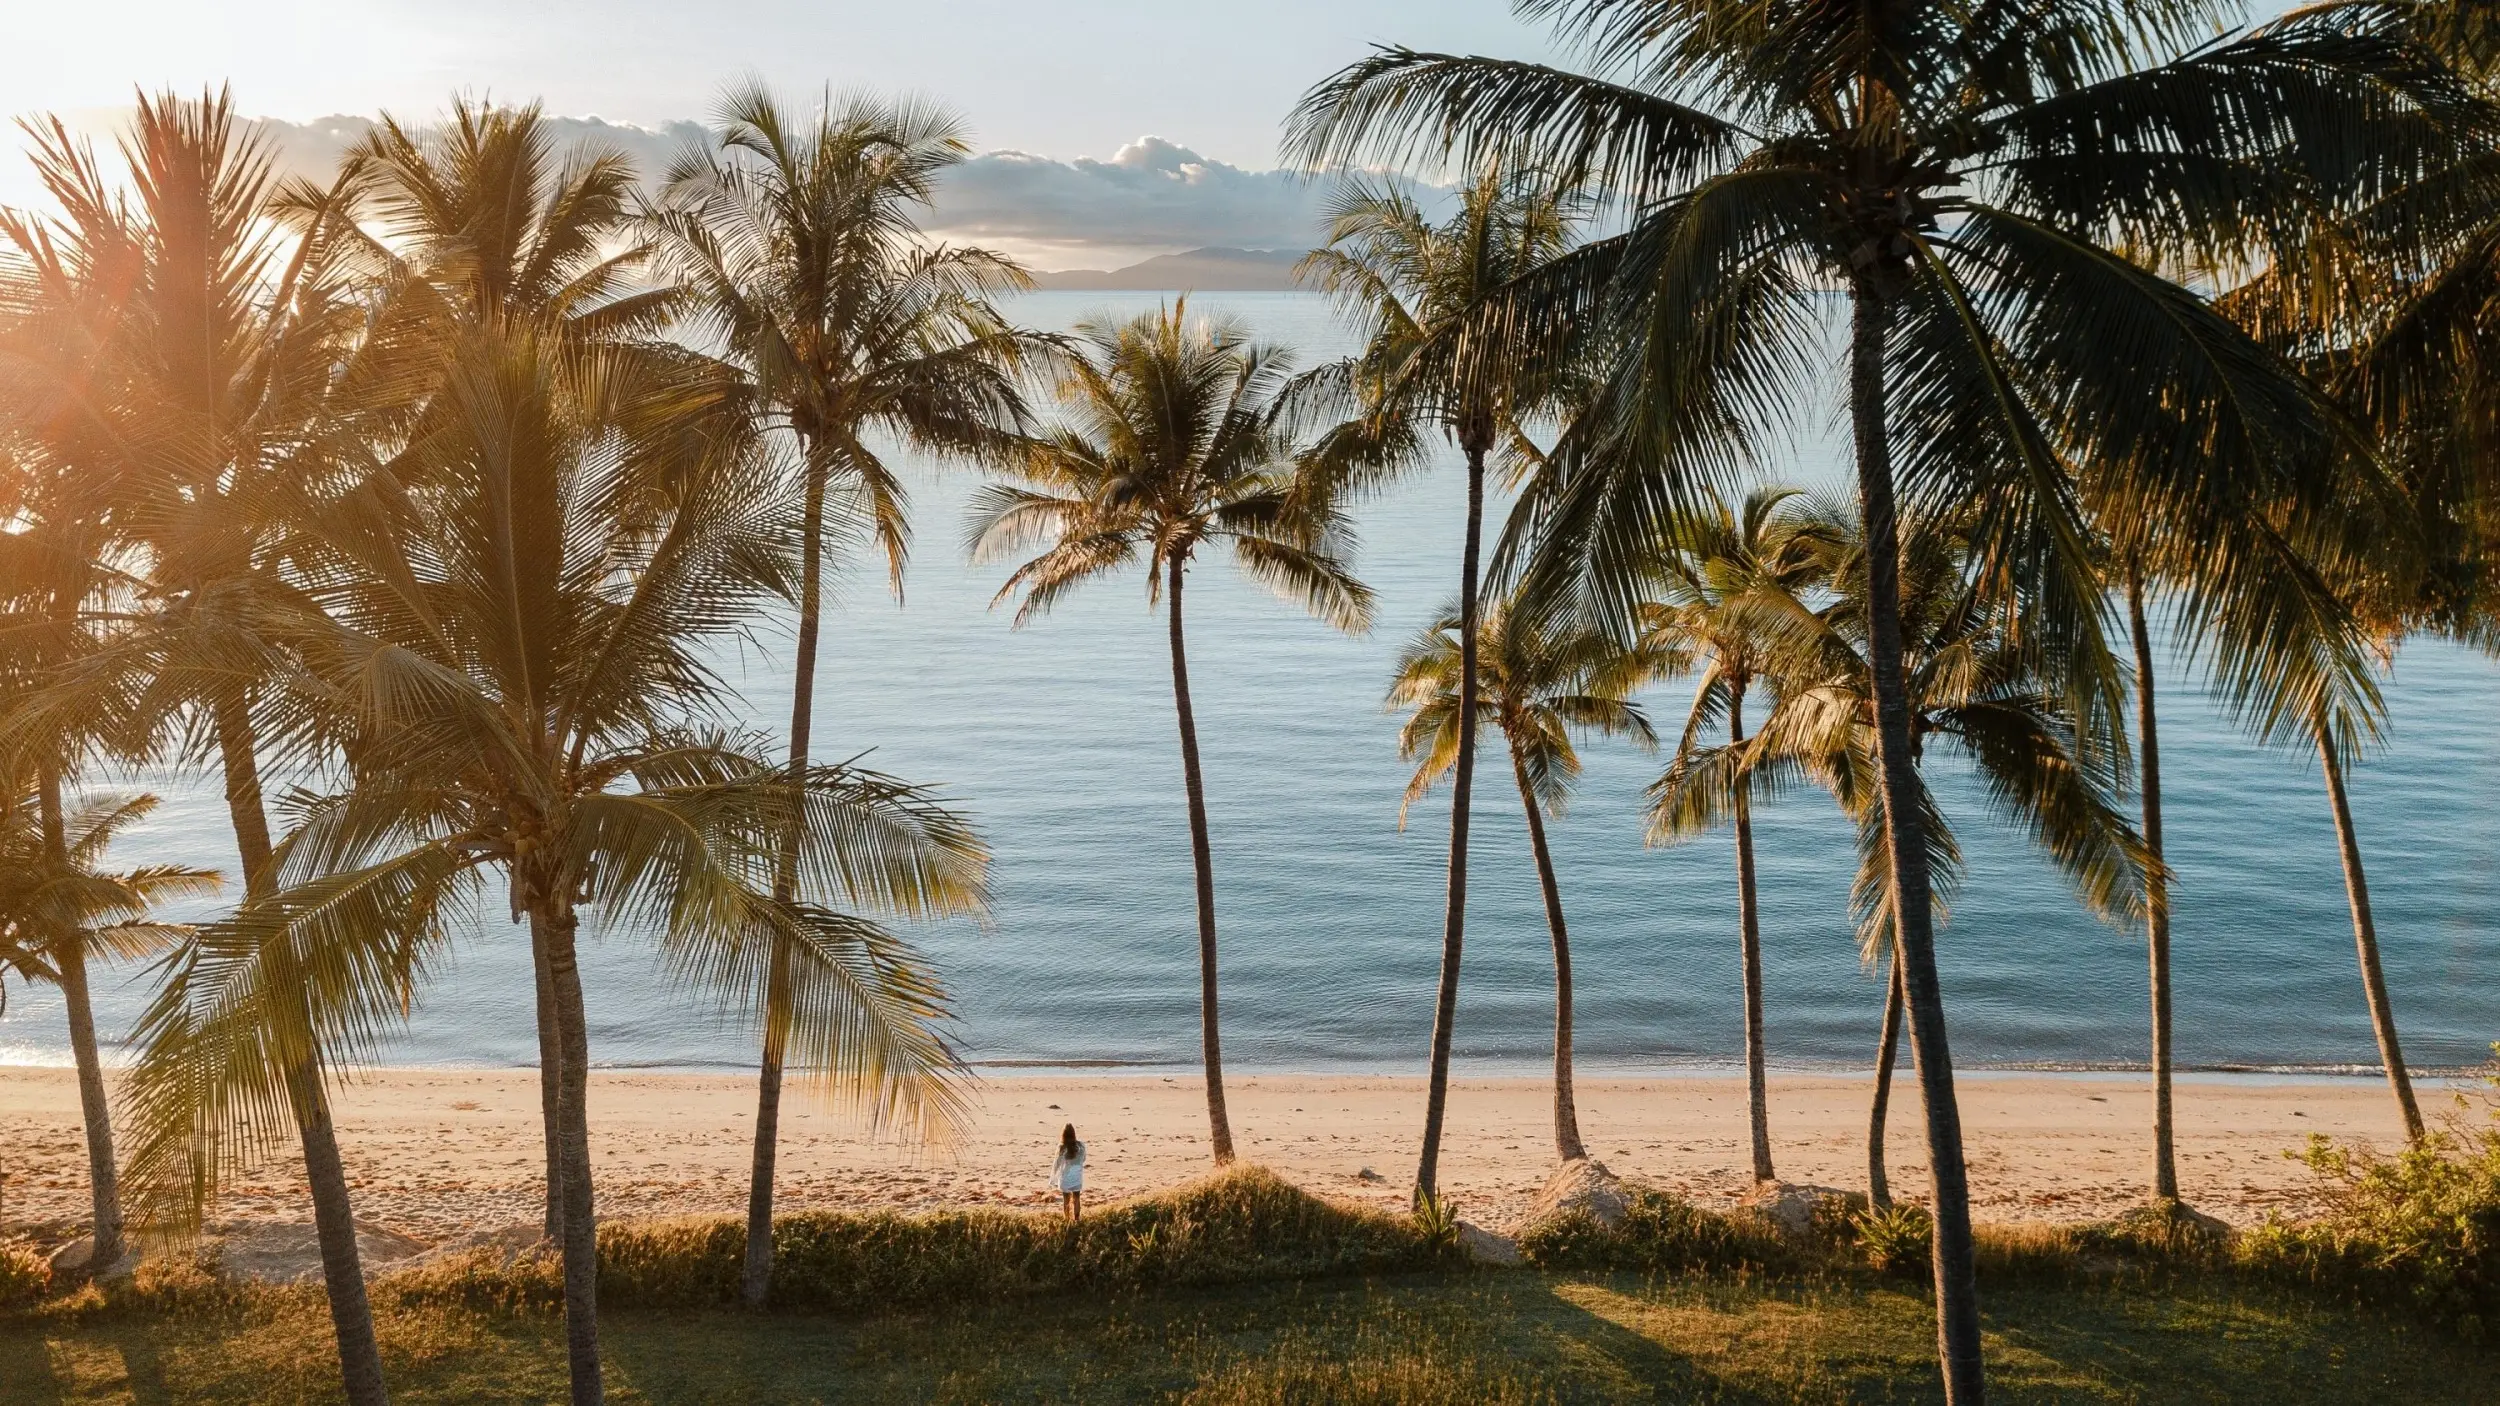 Lone person standing on beach flanked by palm trees and looking out onto the water. Image credit: Tourism and Events Queensland/Melissa Findley